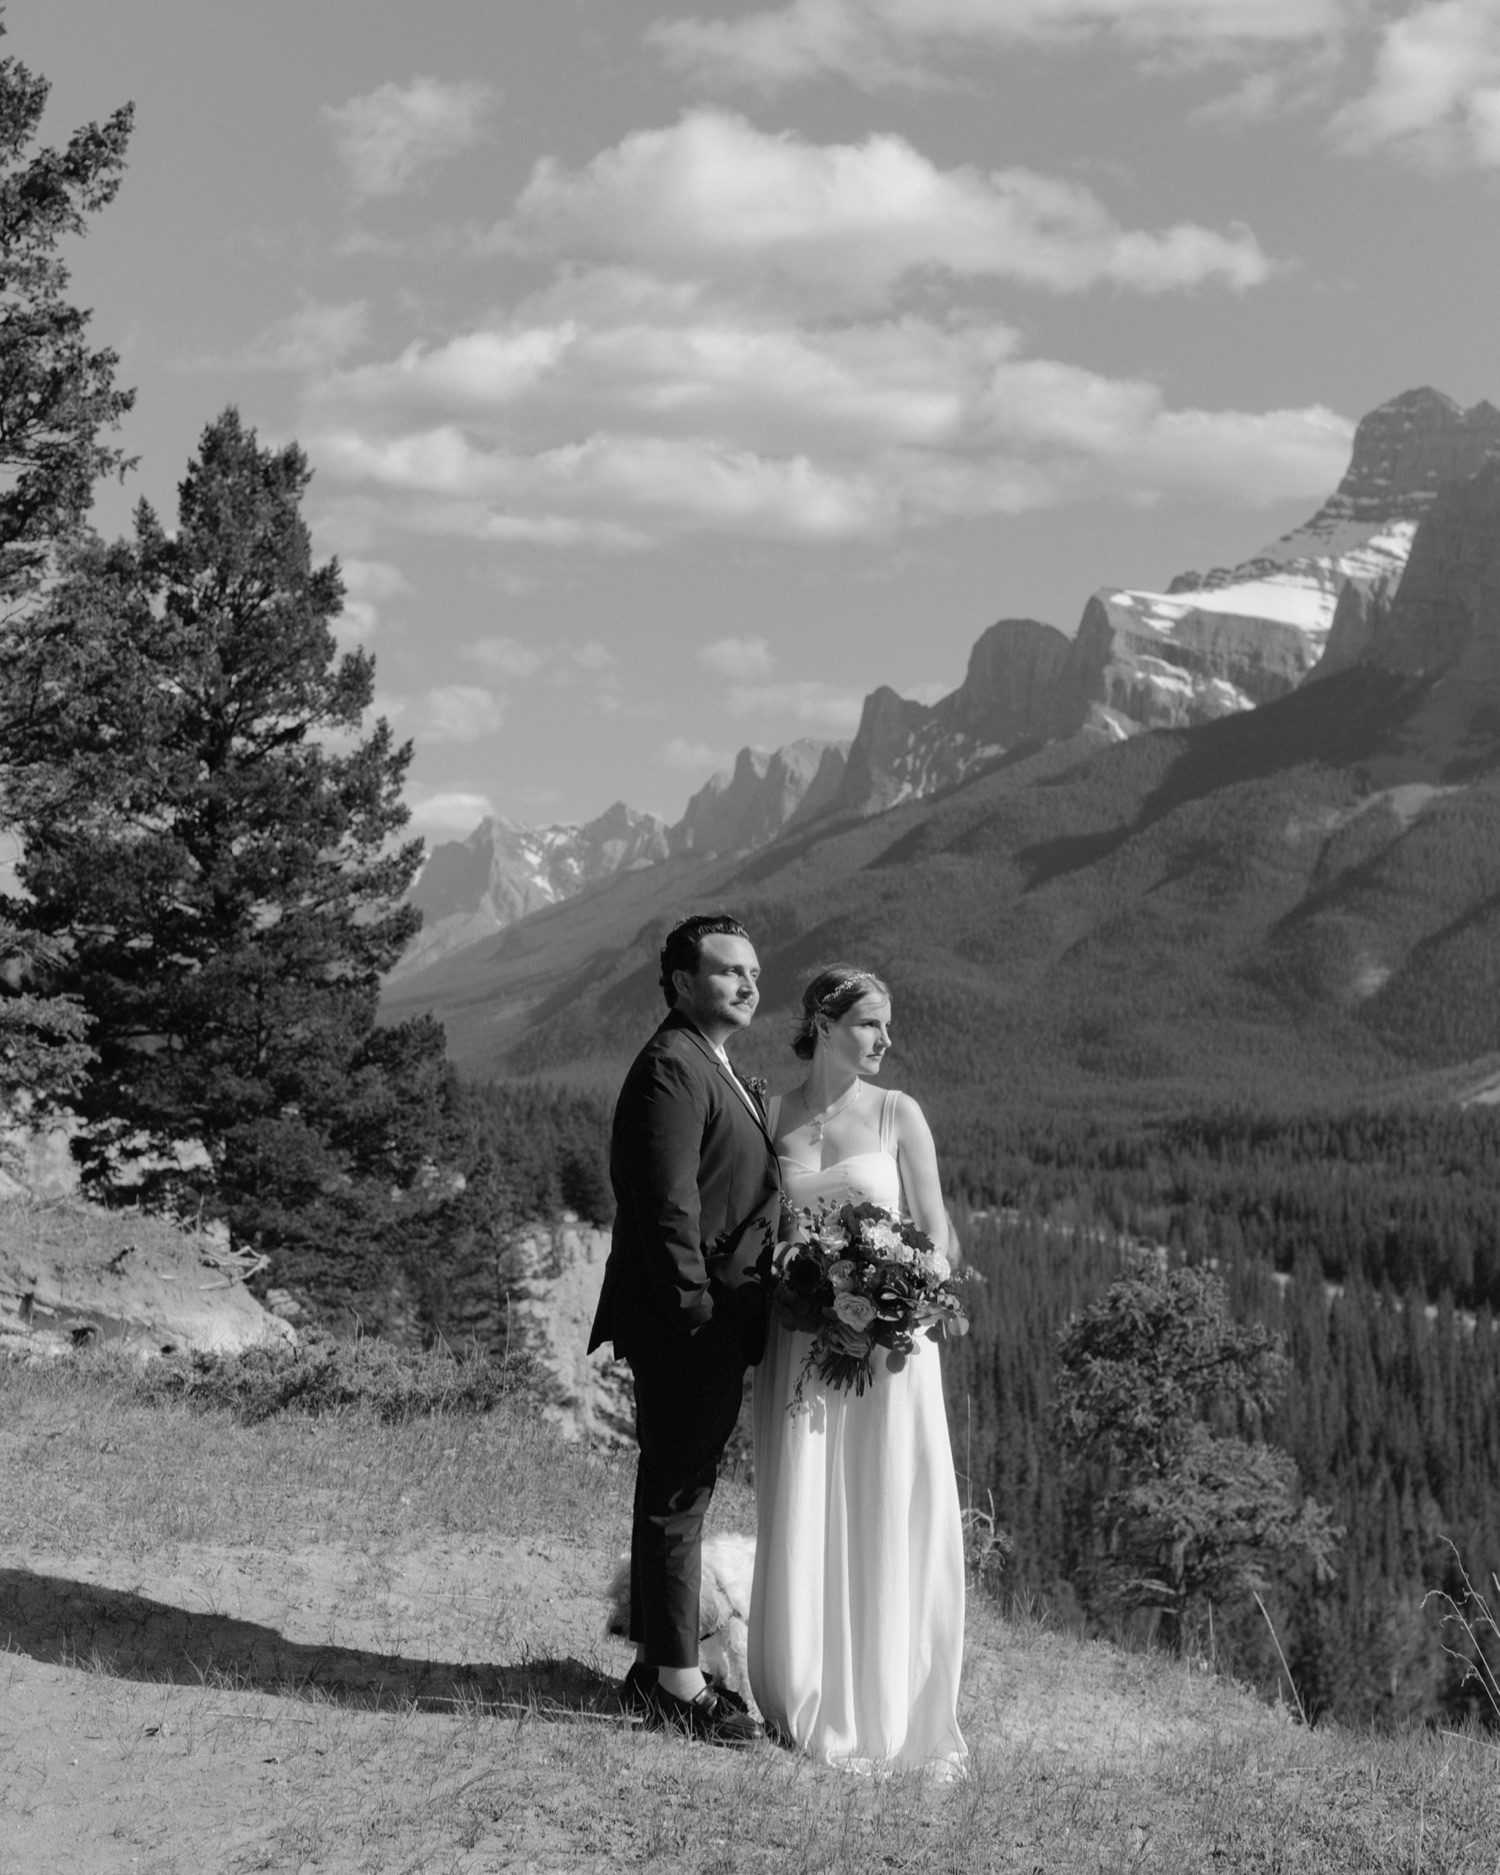 Timeless black and white wedding portraiture in Banff National Park